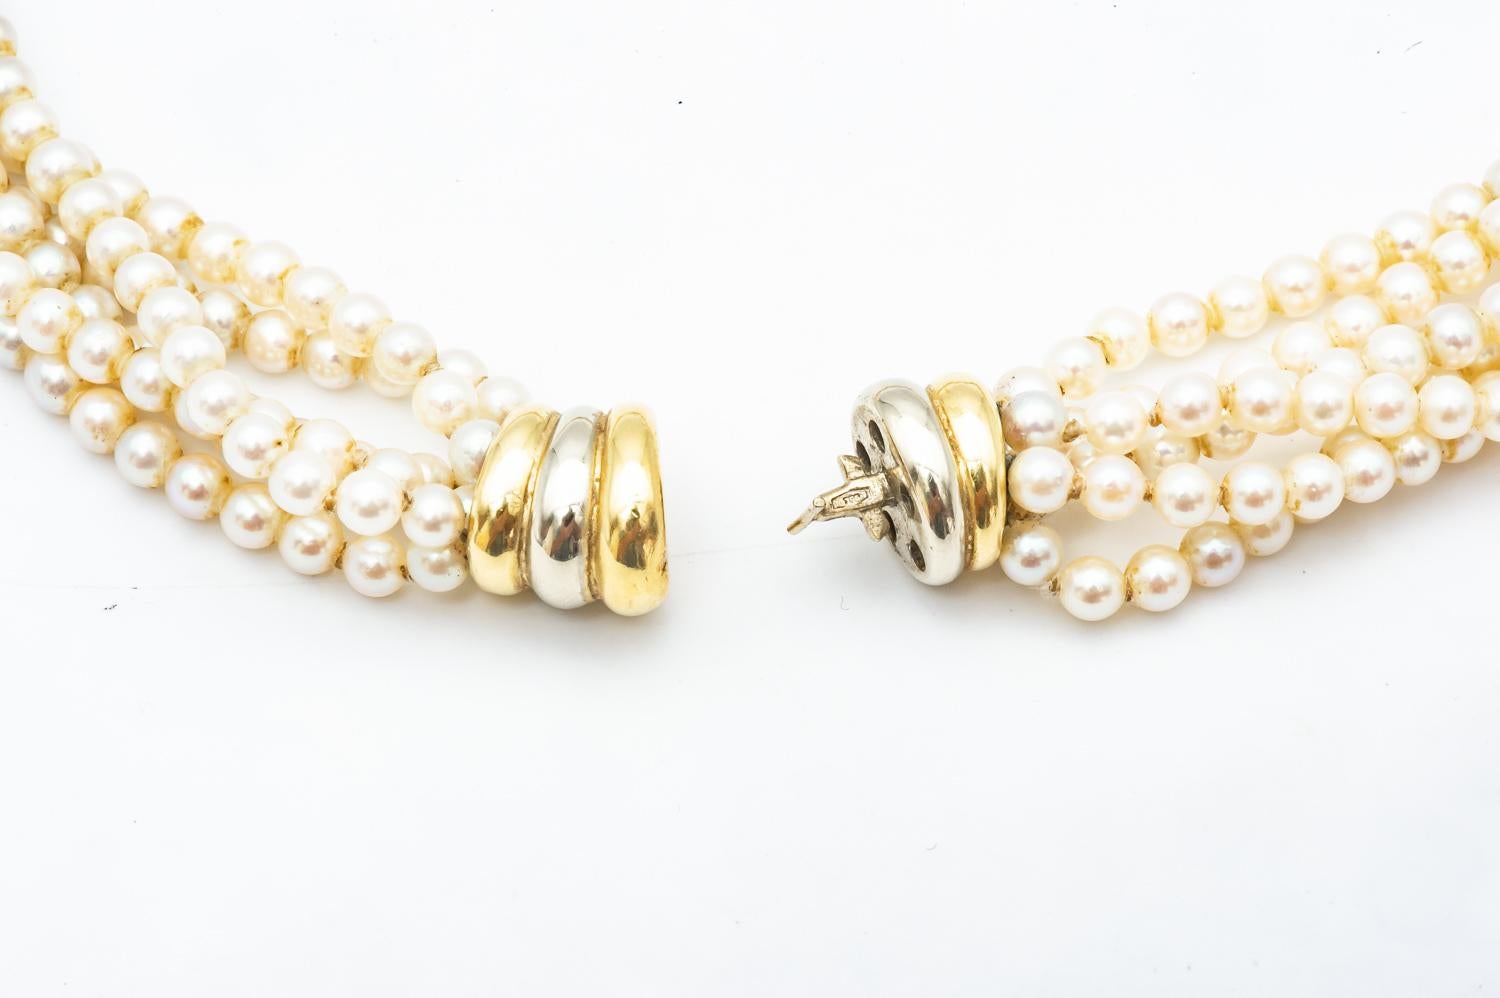 Bead 6 Row Cultured Pearls Necklace Yellow and White Gold 18 Karat For Sale